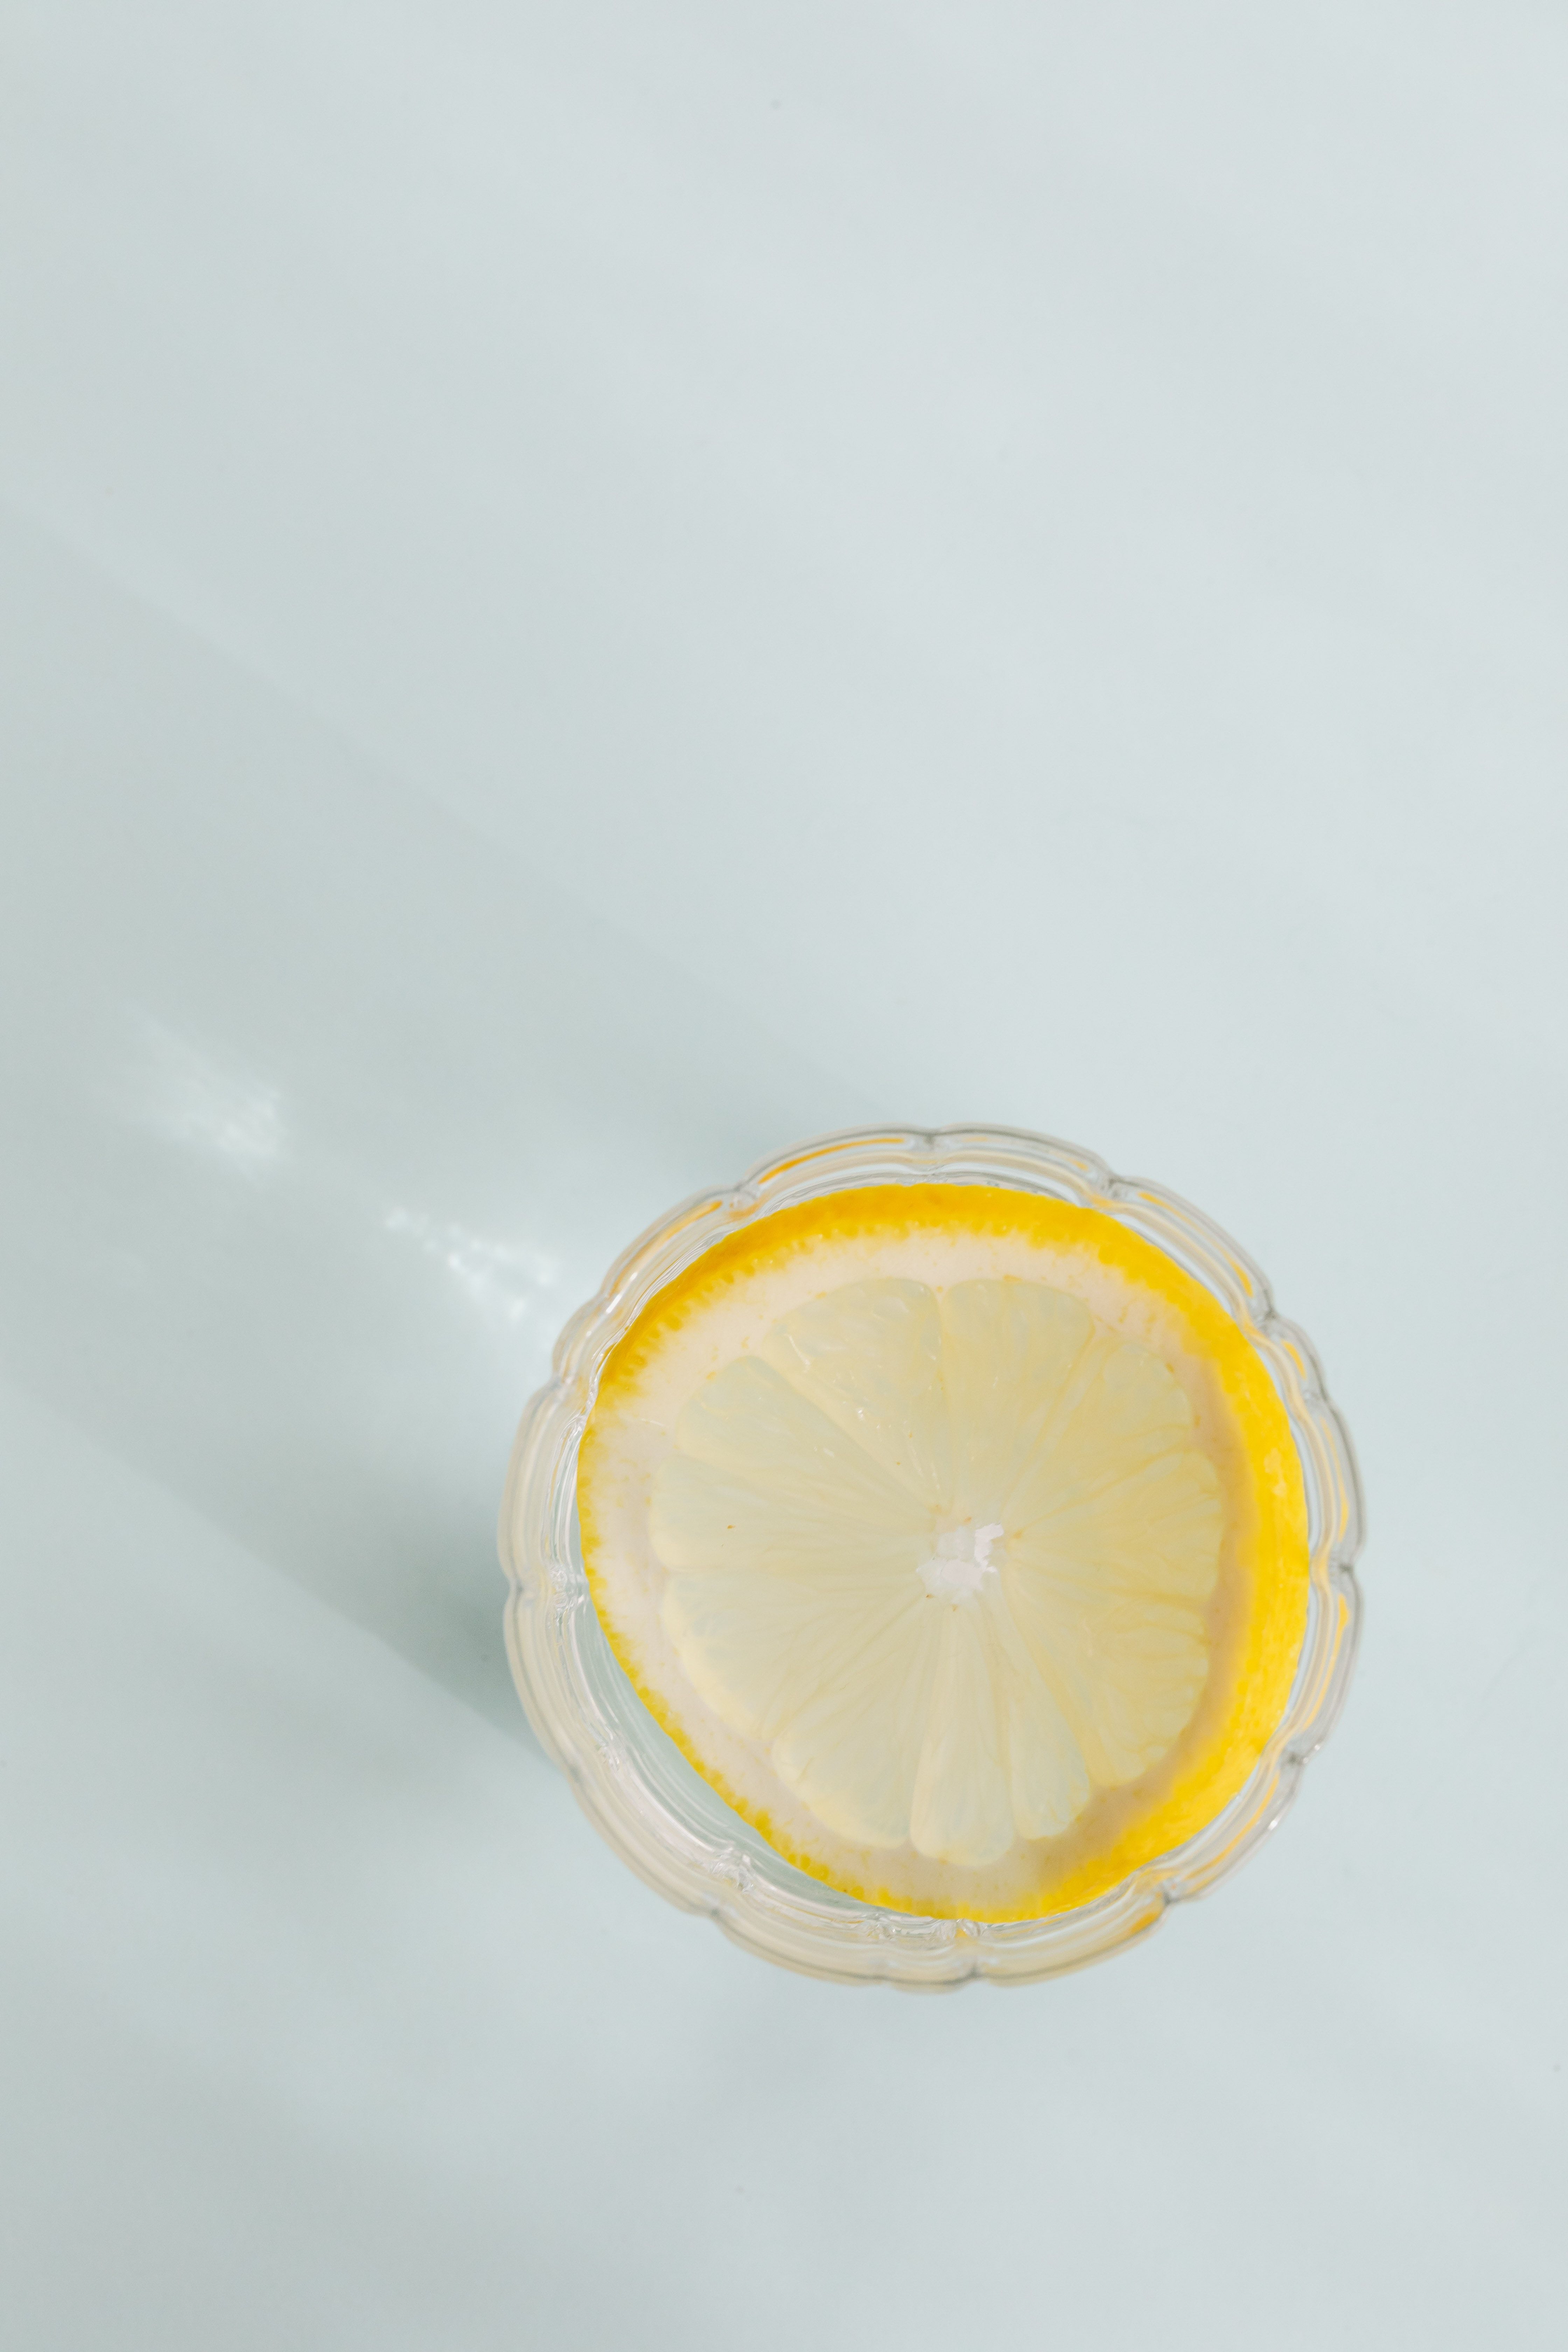 A glass with lemon slices in it - Lemon